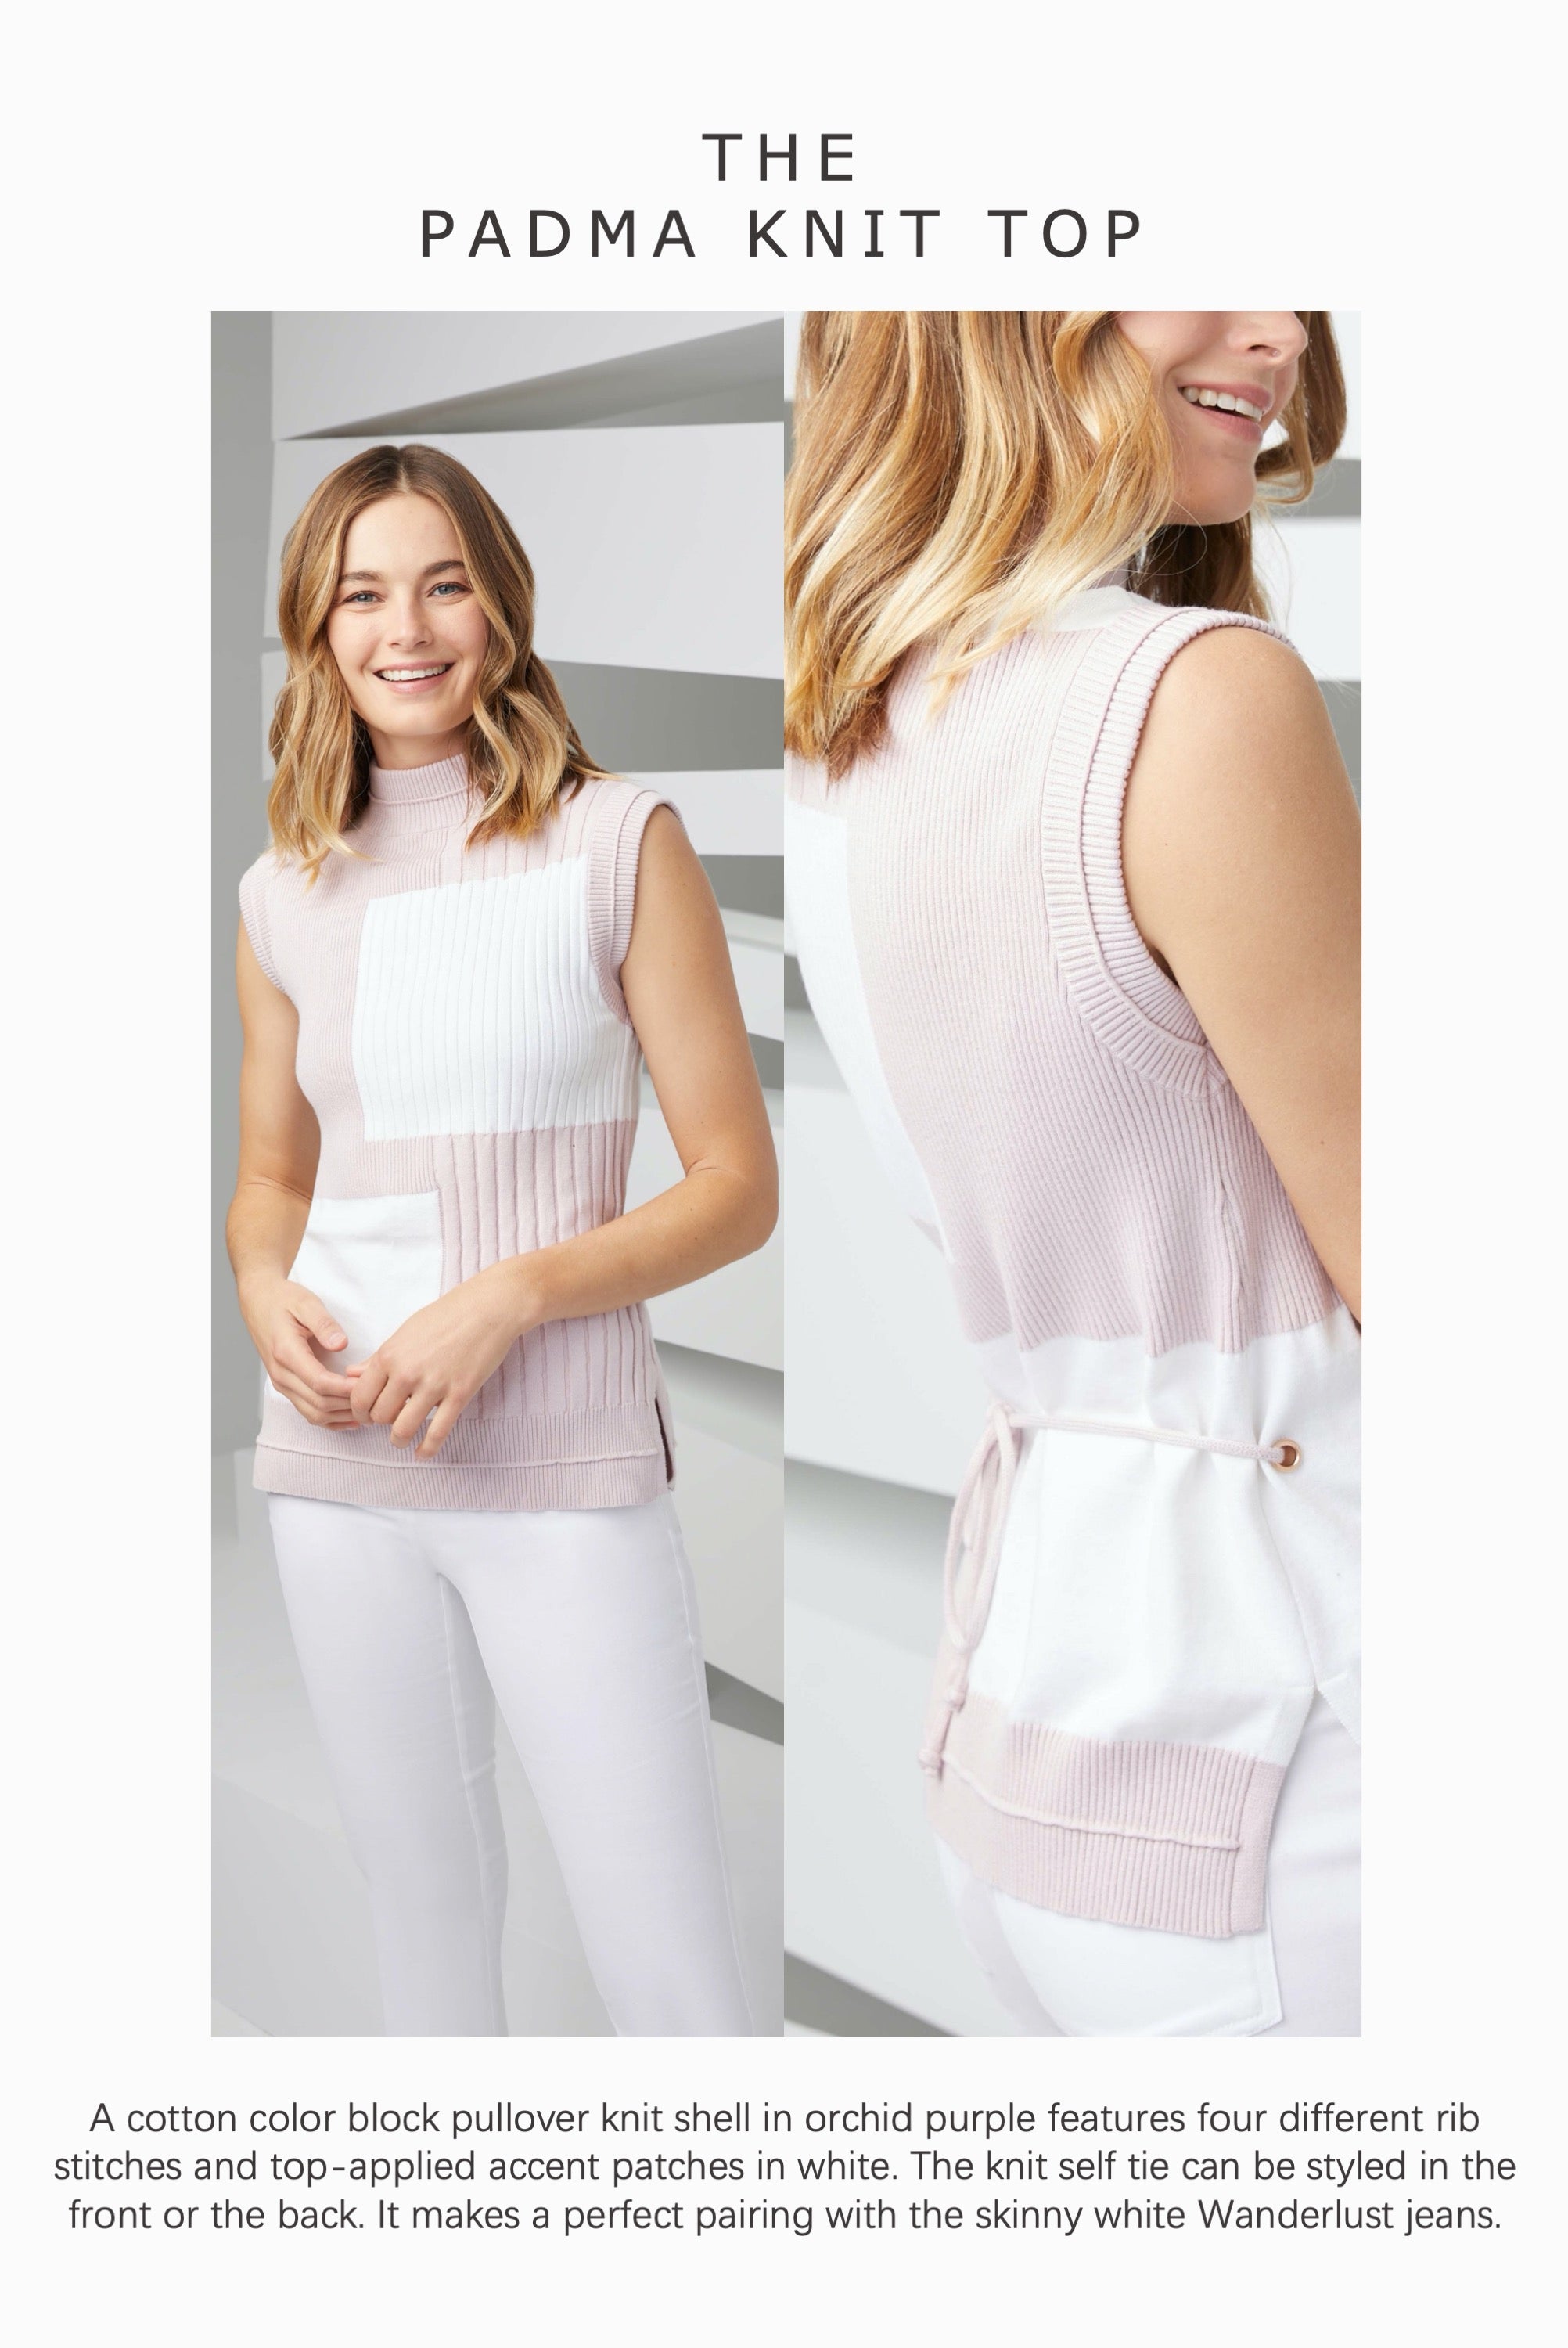 The Padma Knit Top